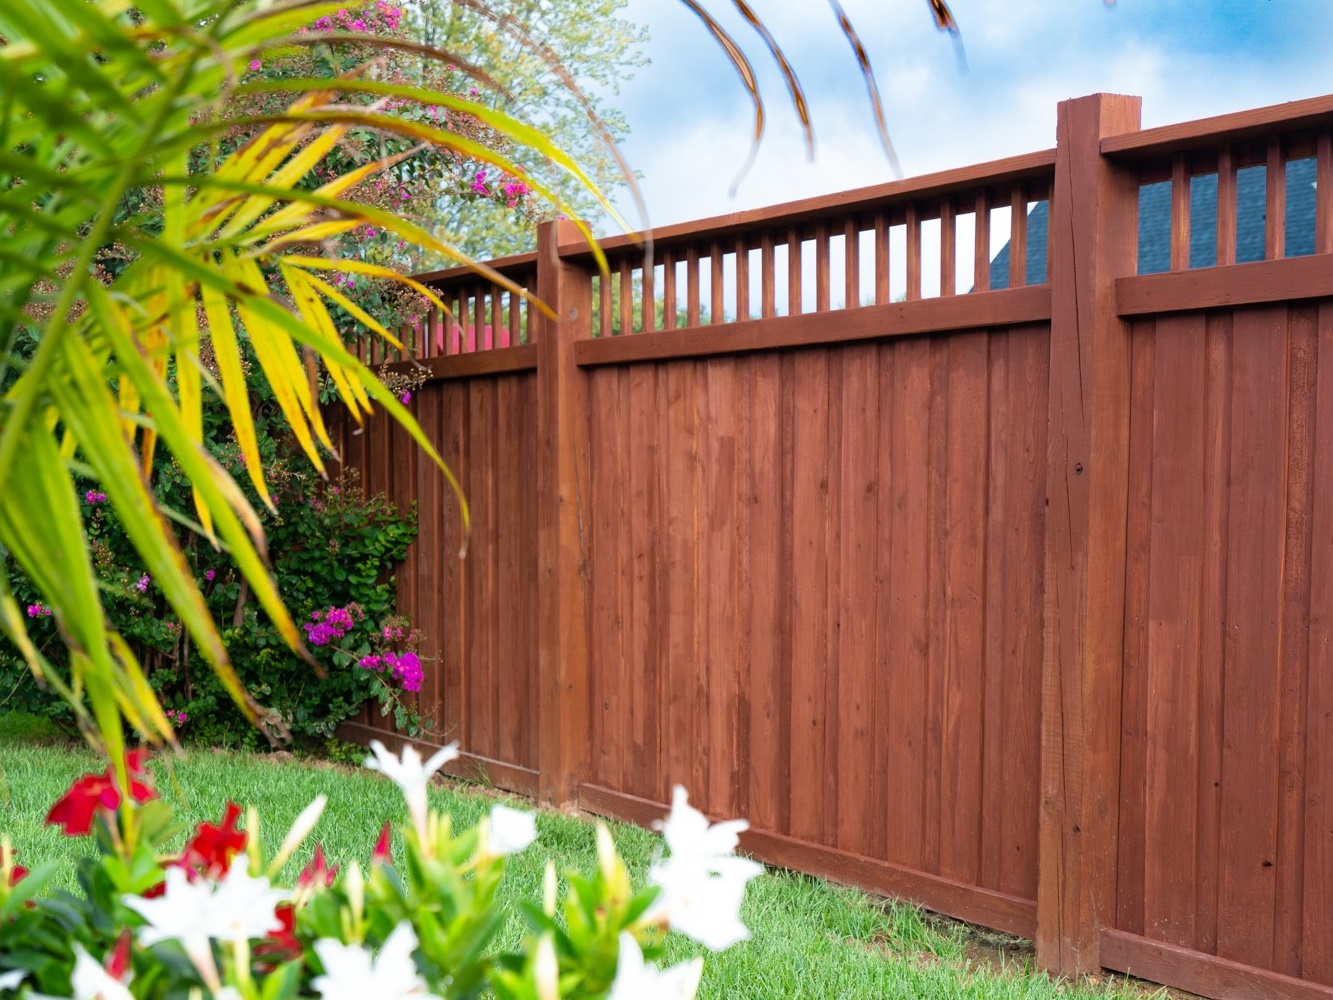 Baskett KY Spindle Top style wood fence